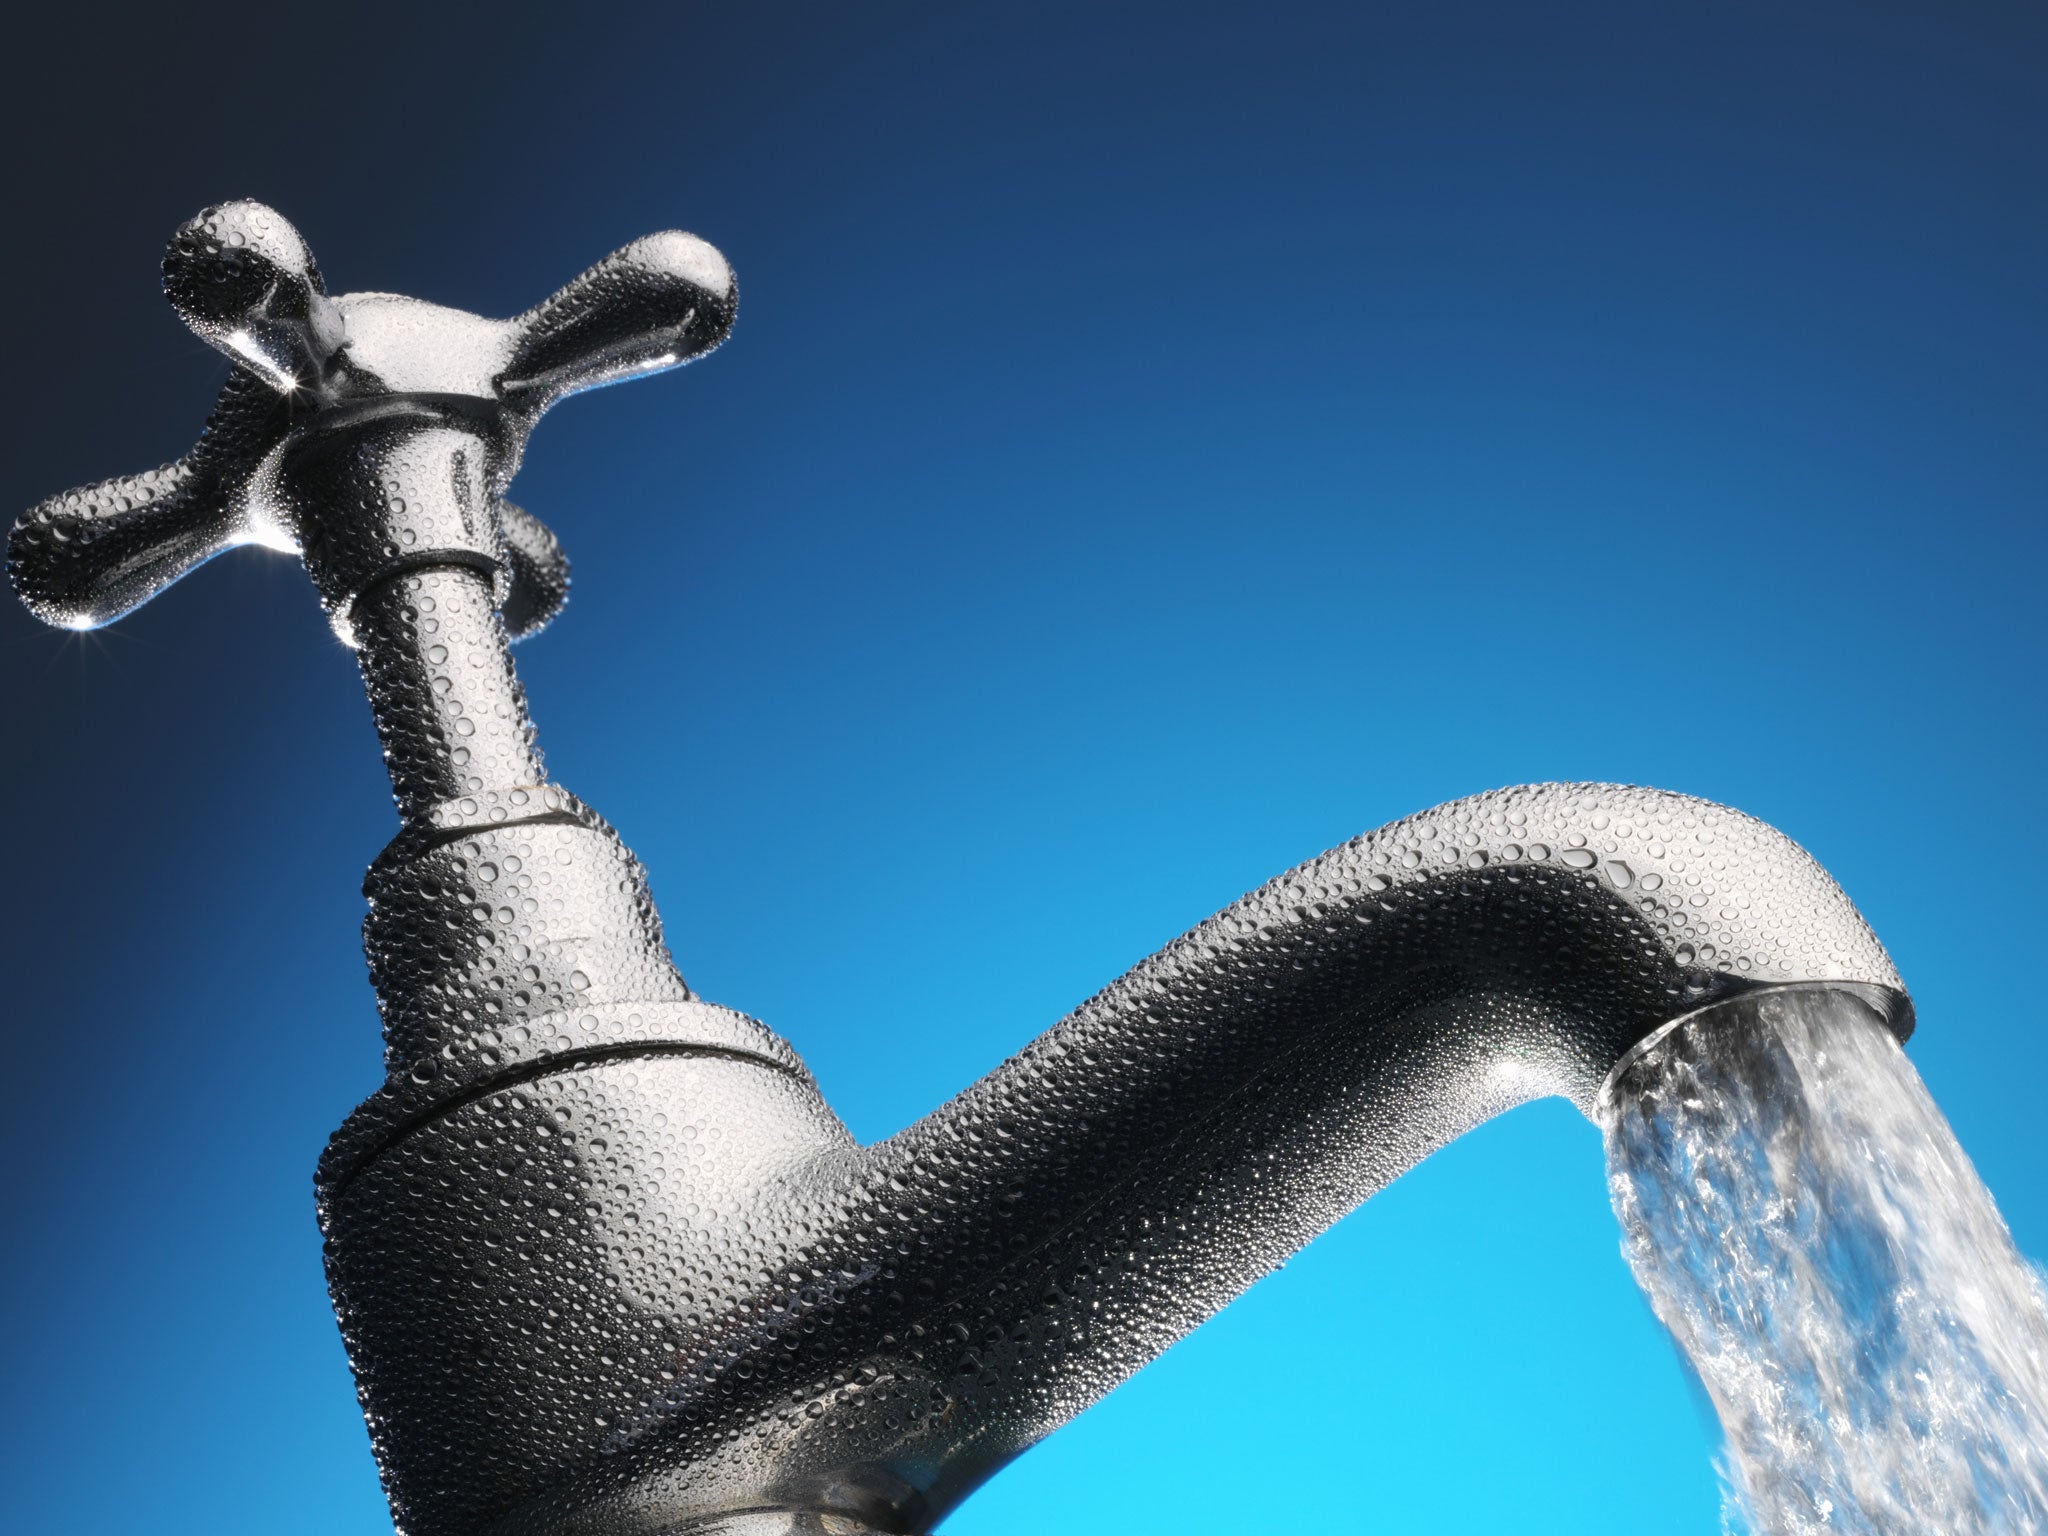 Almost 700,000 financially vulnerable customers now receive reductions on their water bills